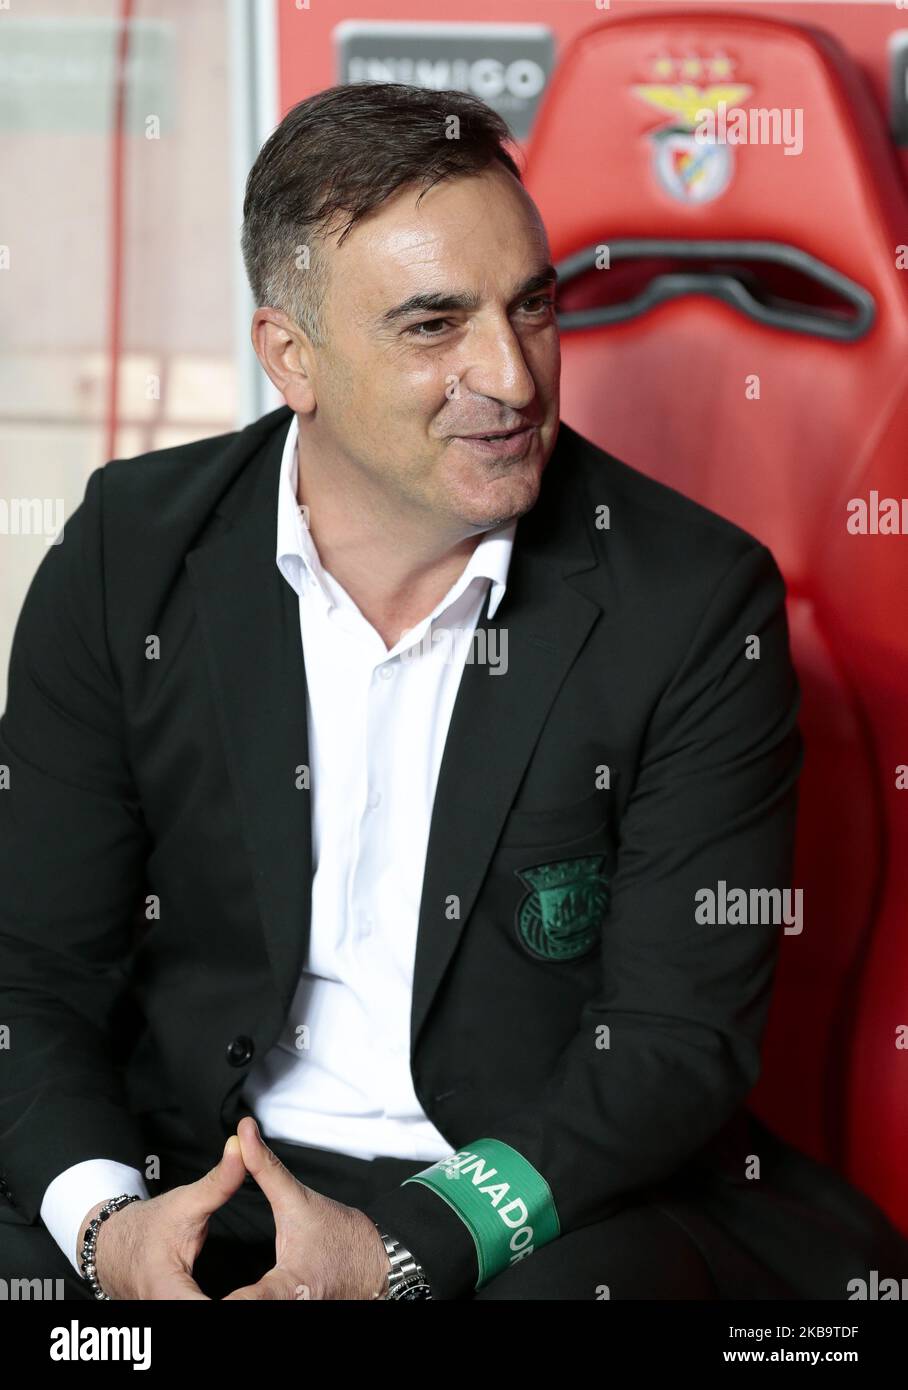 Carlos Carvalhal of Rio Ave FC during the Premier League 2019/20 match between SL Benfica and Rio Ave FC, at Luz Stadium in Lisbon on November 2, 2019. (Photo by Paulo Nascimento / DPI / NurPhoto) Stock Photo